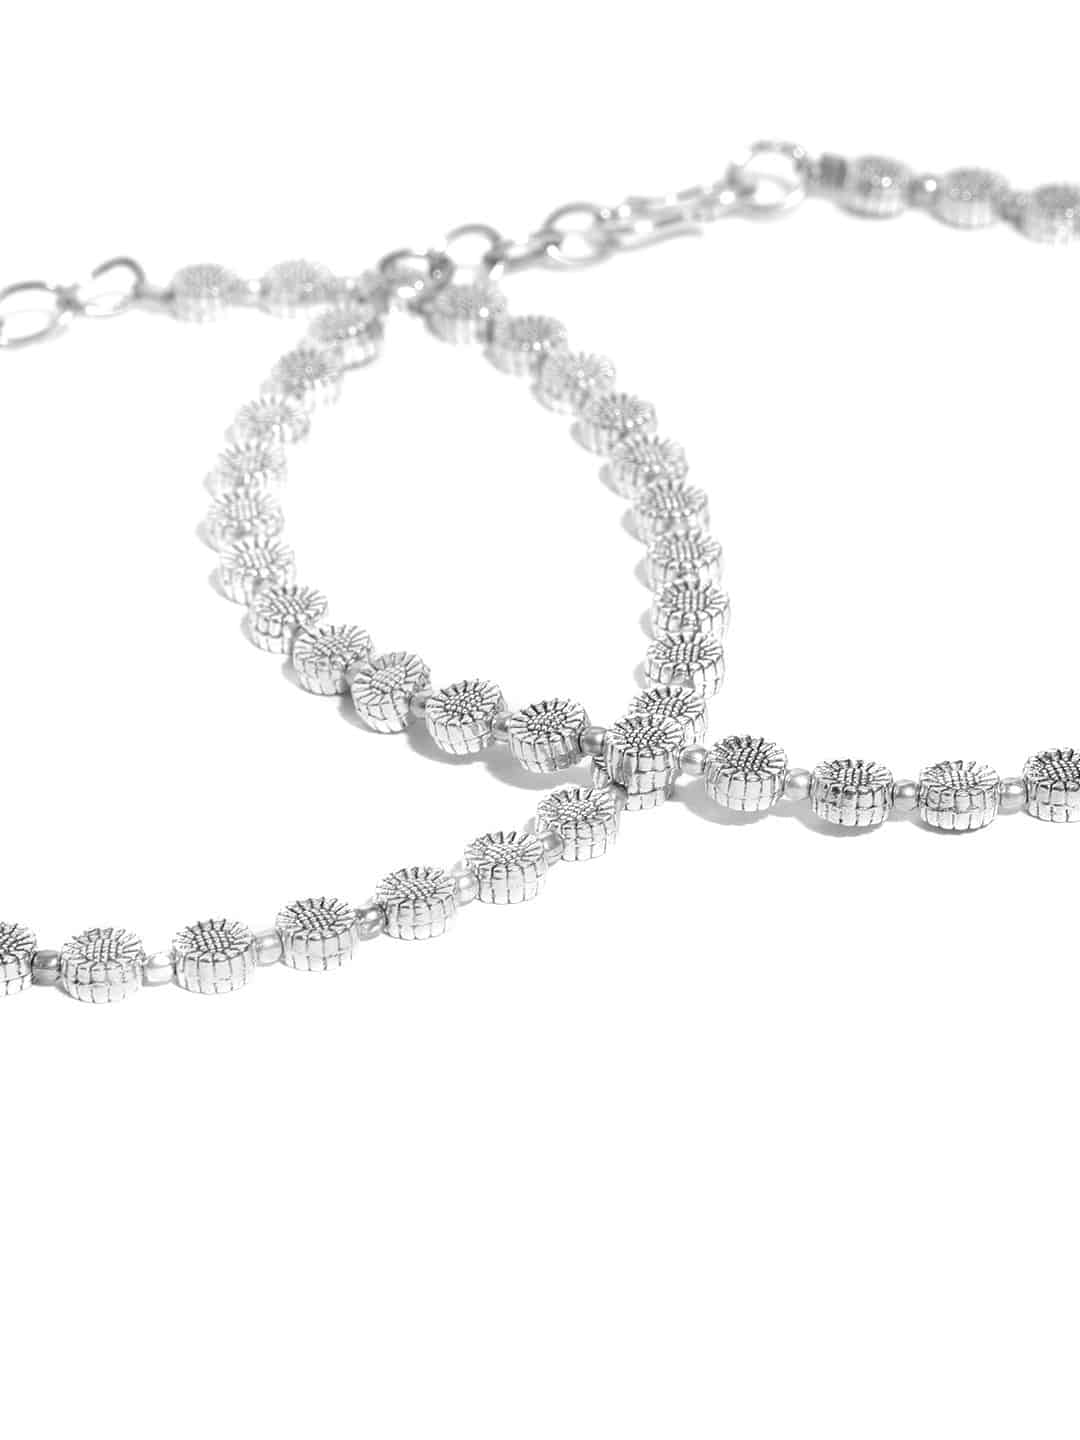 Women's Oxidised Silver Circular Pattern Handcrafted Anklets Set Of 2 - Priyaasi